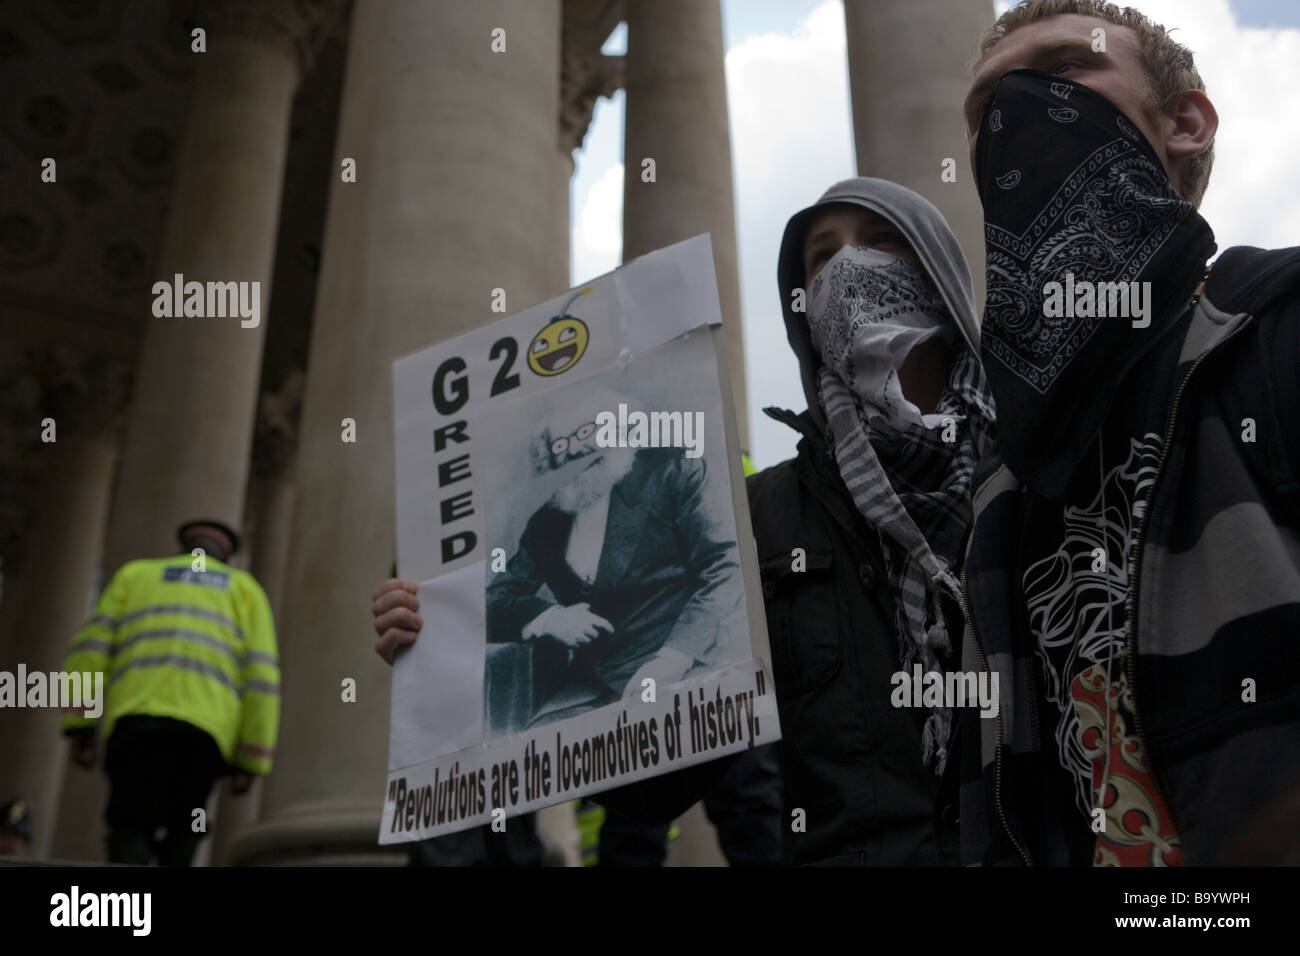 Anti-capitalist youths in masks protest against G20 summit in London, April 1 2009 Stock Photo